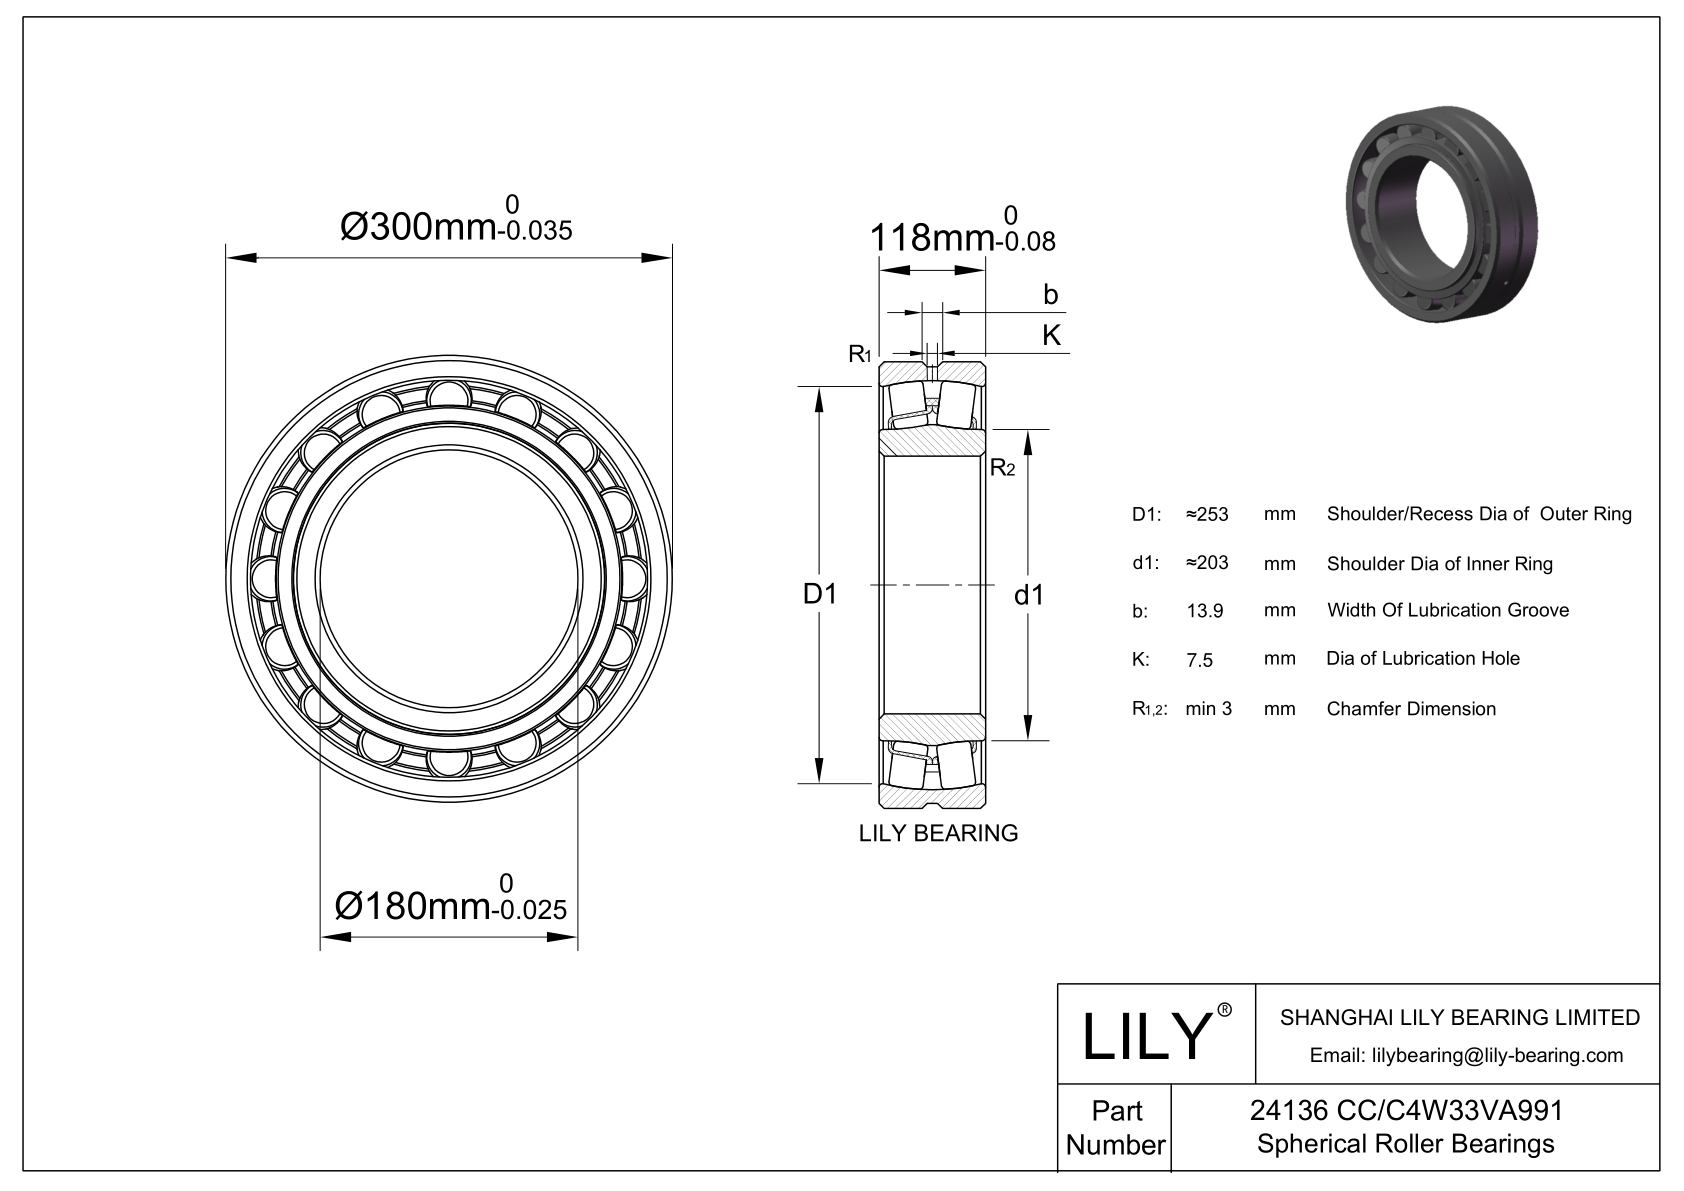 24136 CC/C4W33VA991 Double Row Spherical Roller Bearing cad drawing